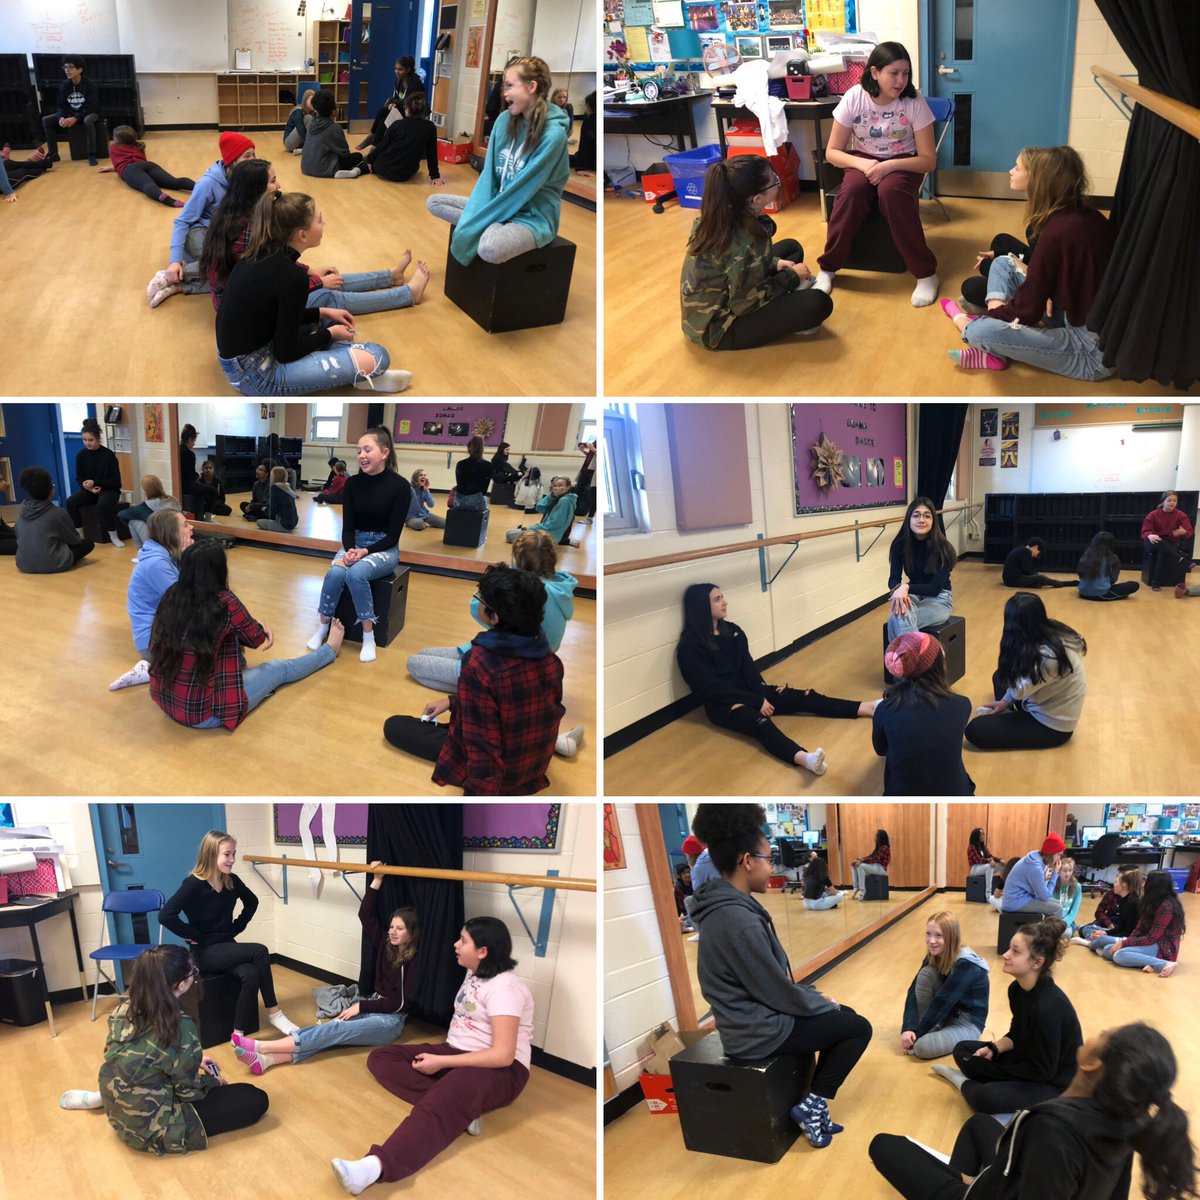 Grade 8 @QESrPS students putting their characters on the “hot seat”. This is a great drama exercise to learn more about the characters you are creating or portraying! #pdsbdrama